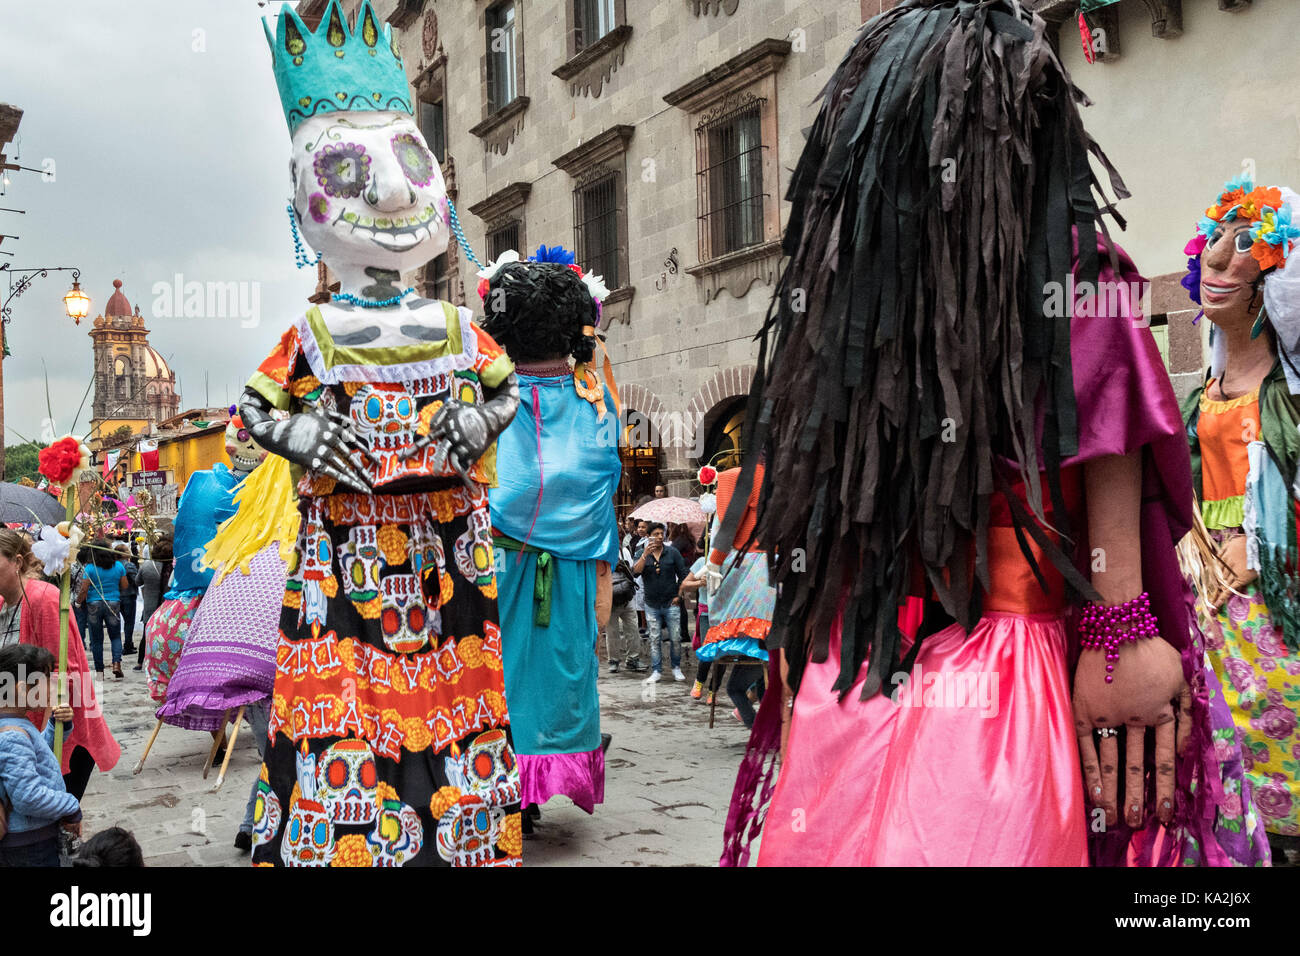 A parade of giant paper-mache puppets called mojigangas dance in a procession through the city at the start of the week long fiesta of the patron saint Saint Michael September 22, 2017 in San Miguel de Allende, Mexico. Stock Photo